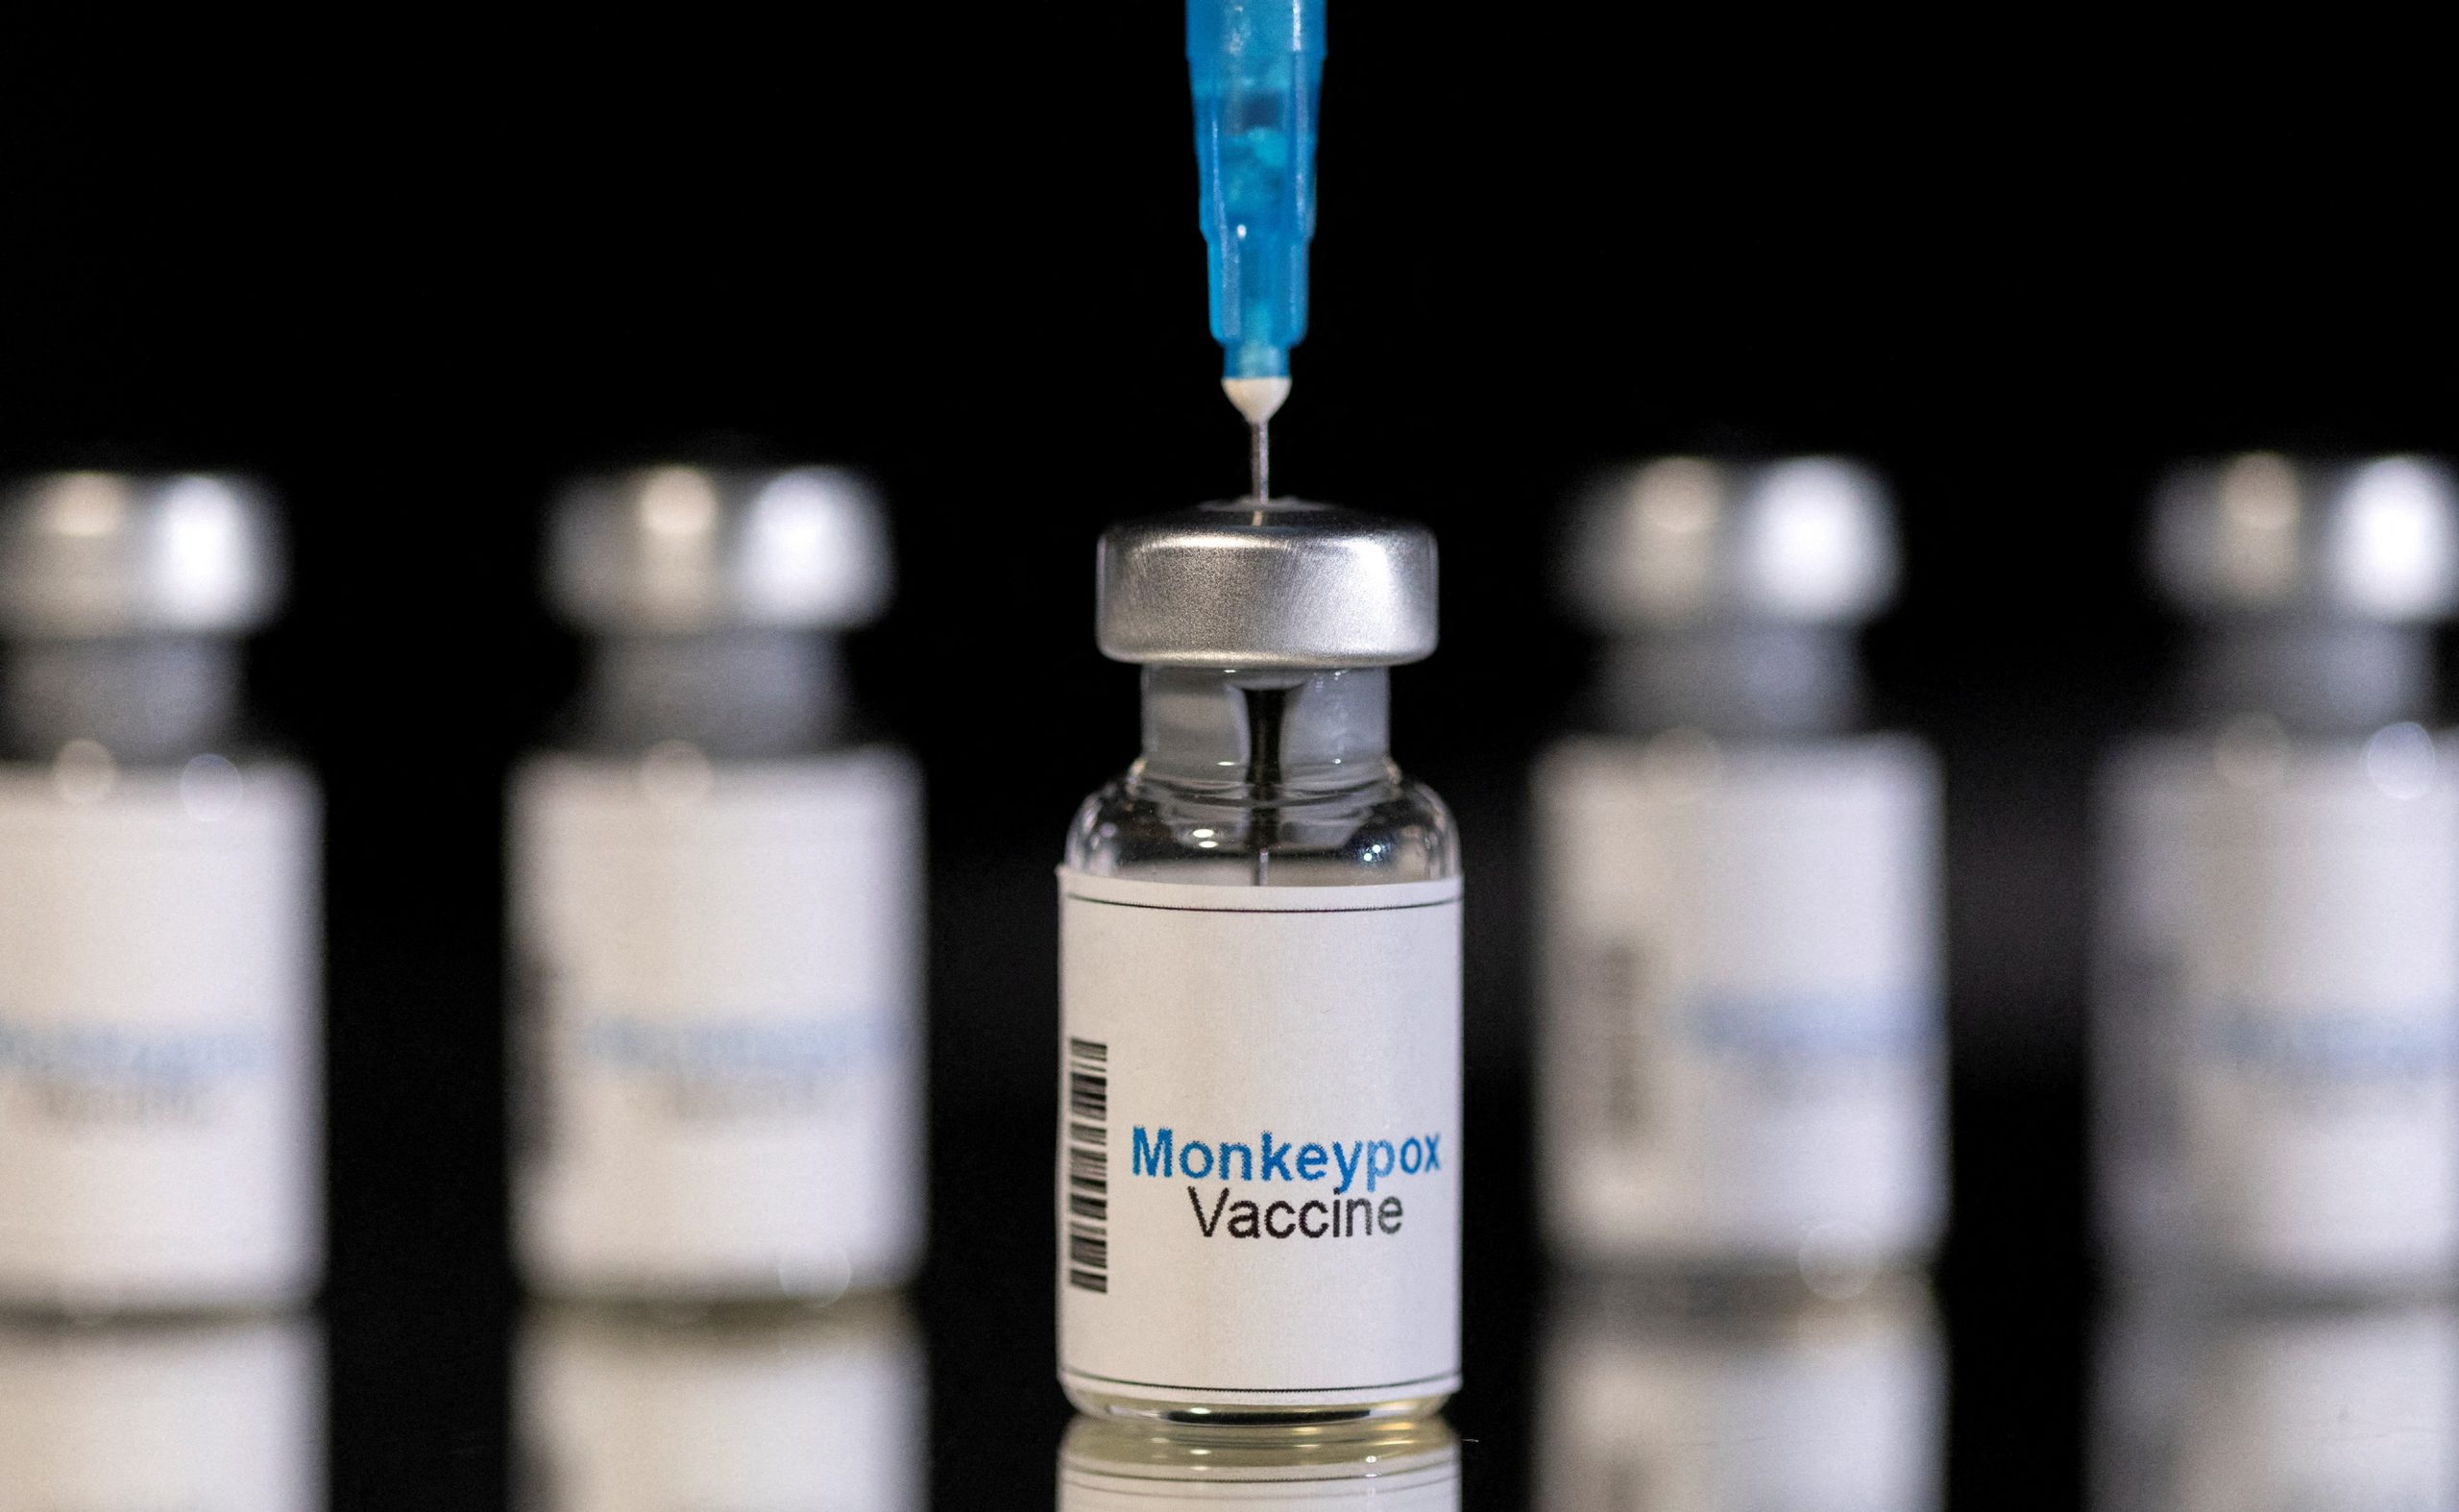 Second shipment of mpox vaccines arrive in TT